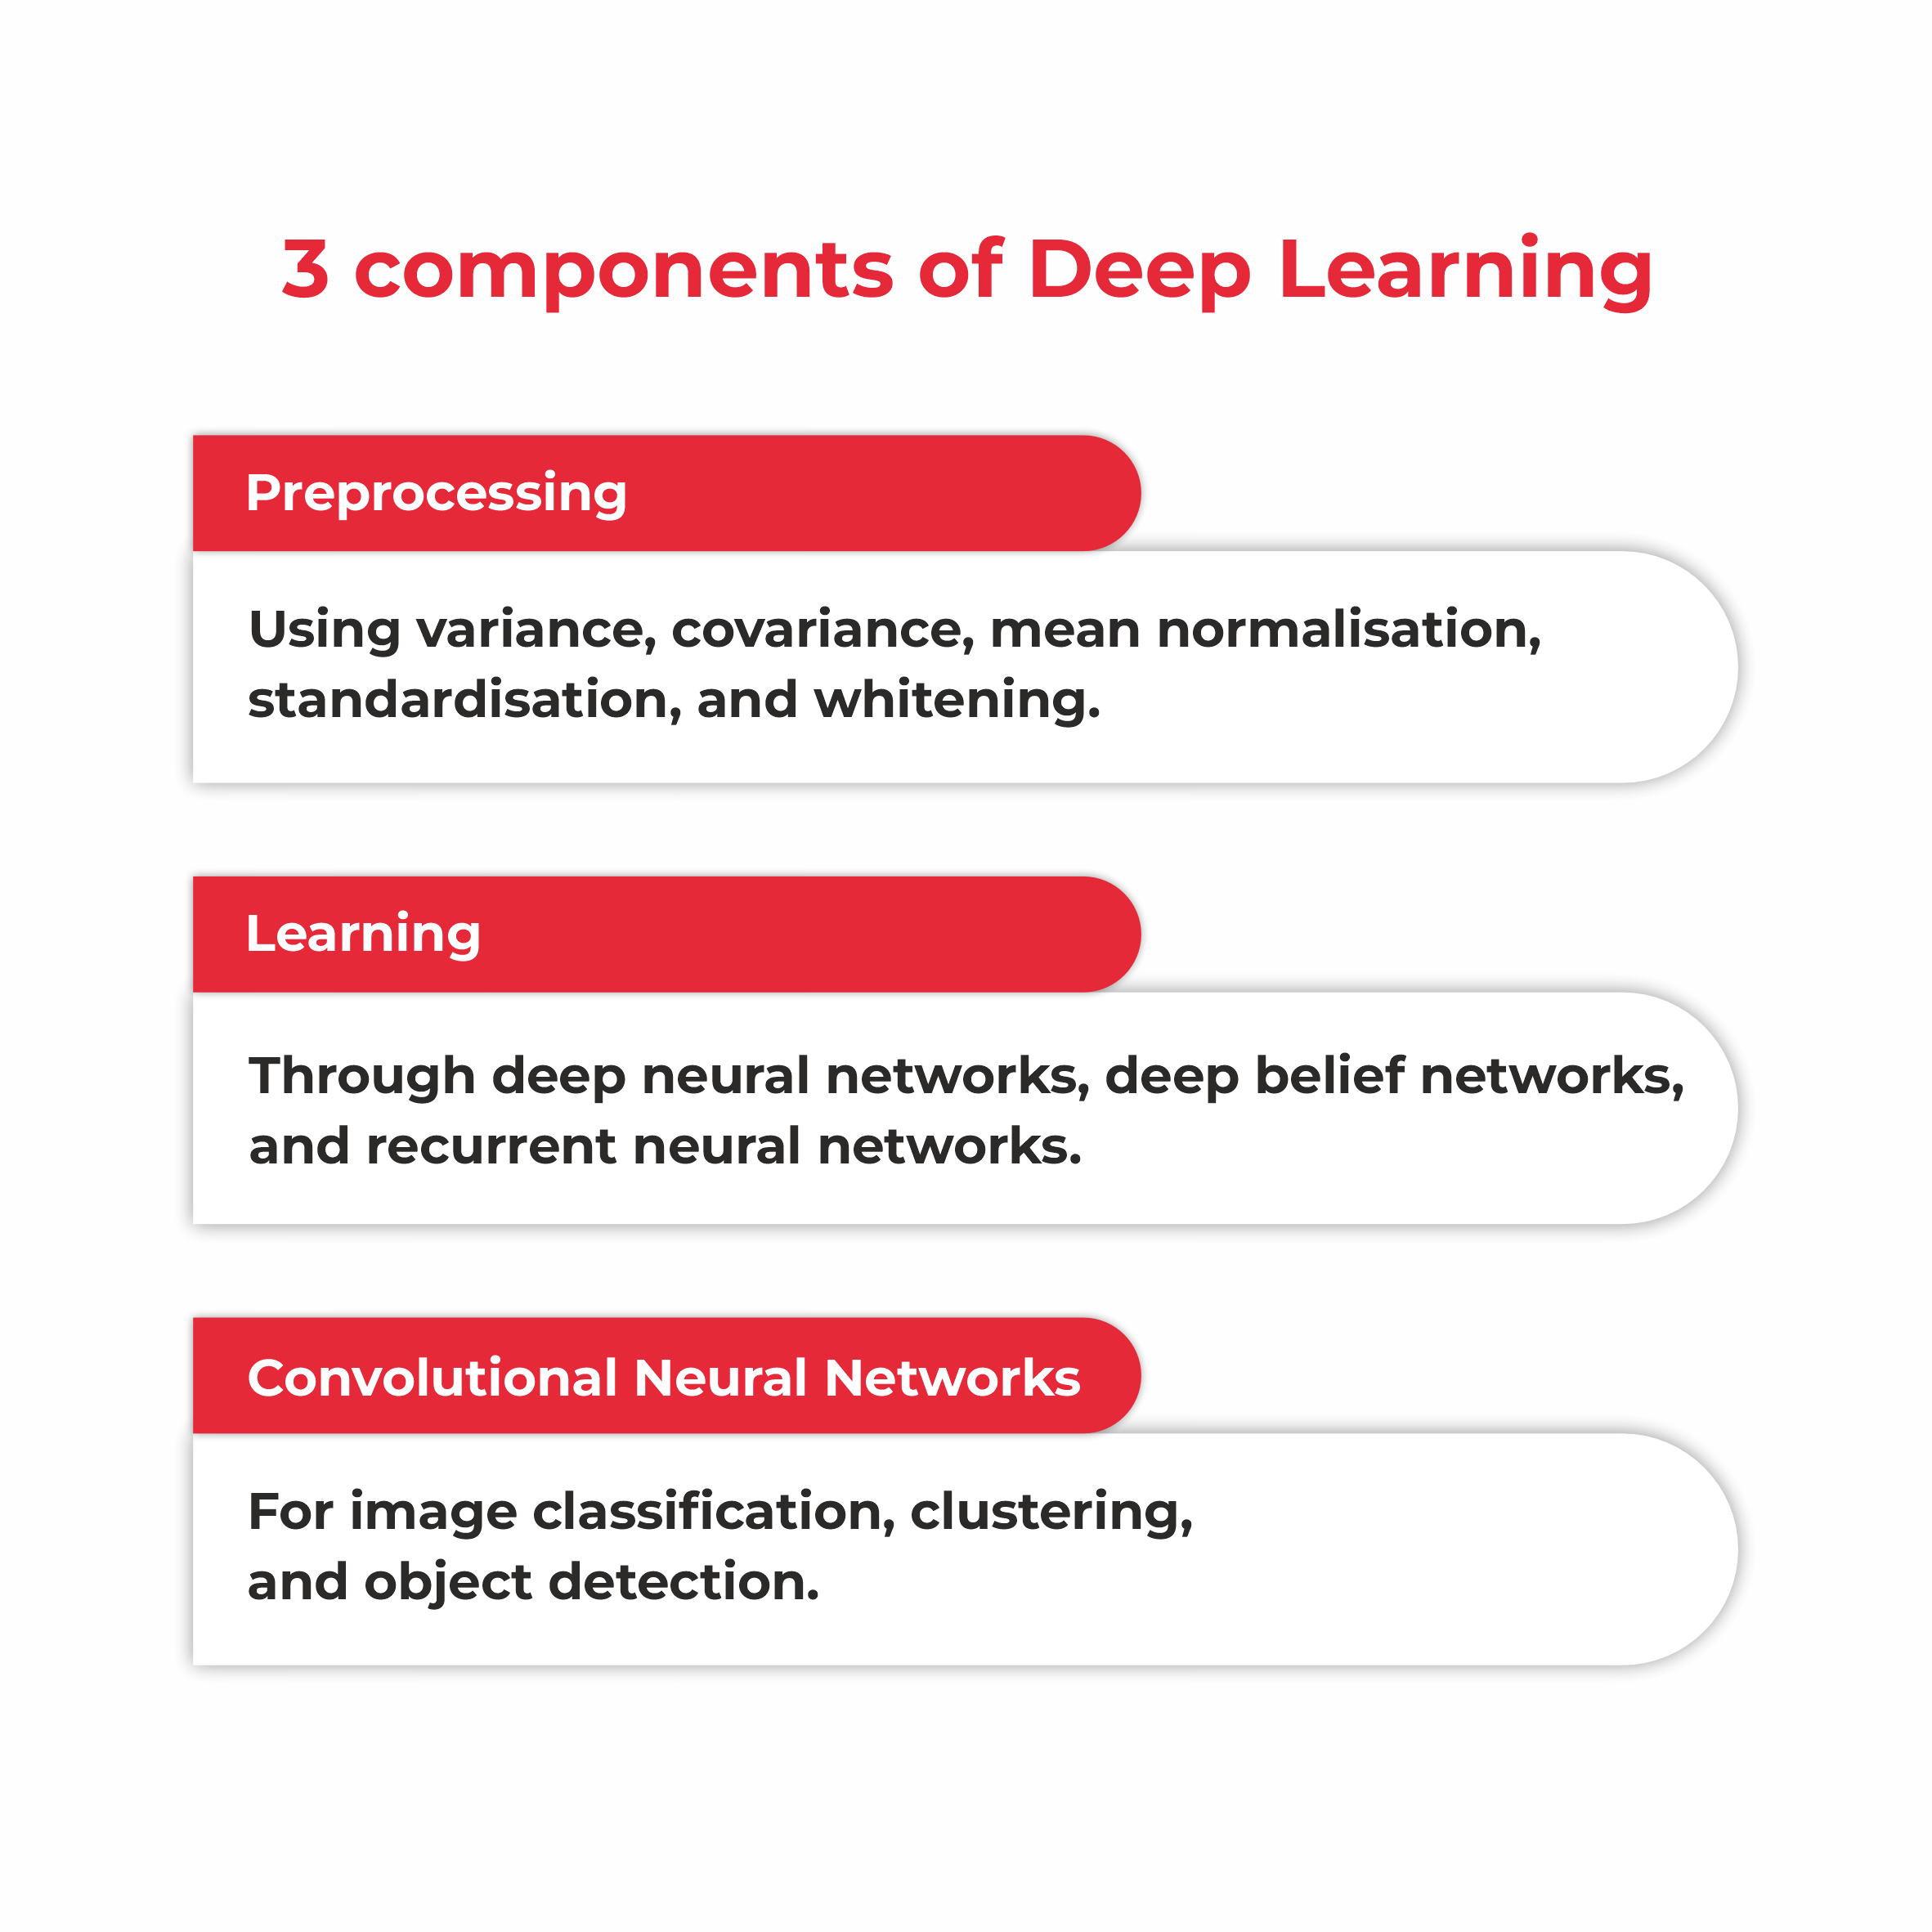 3 components of Deep Learning